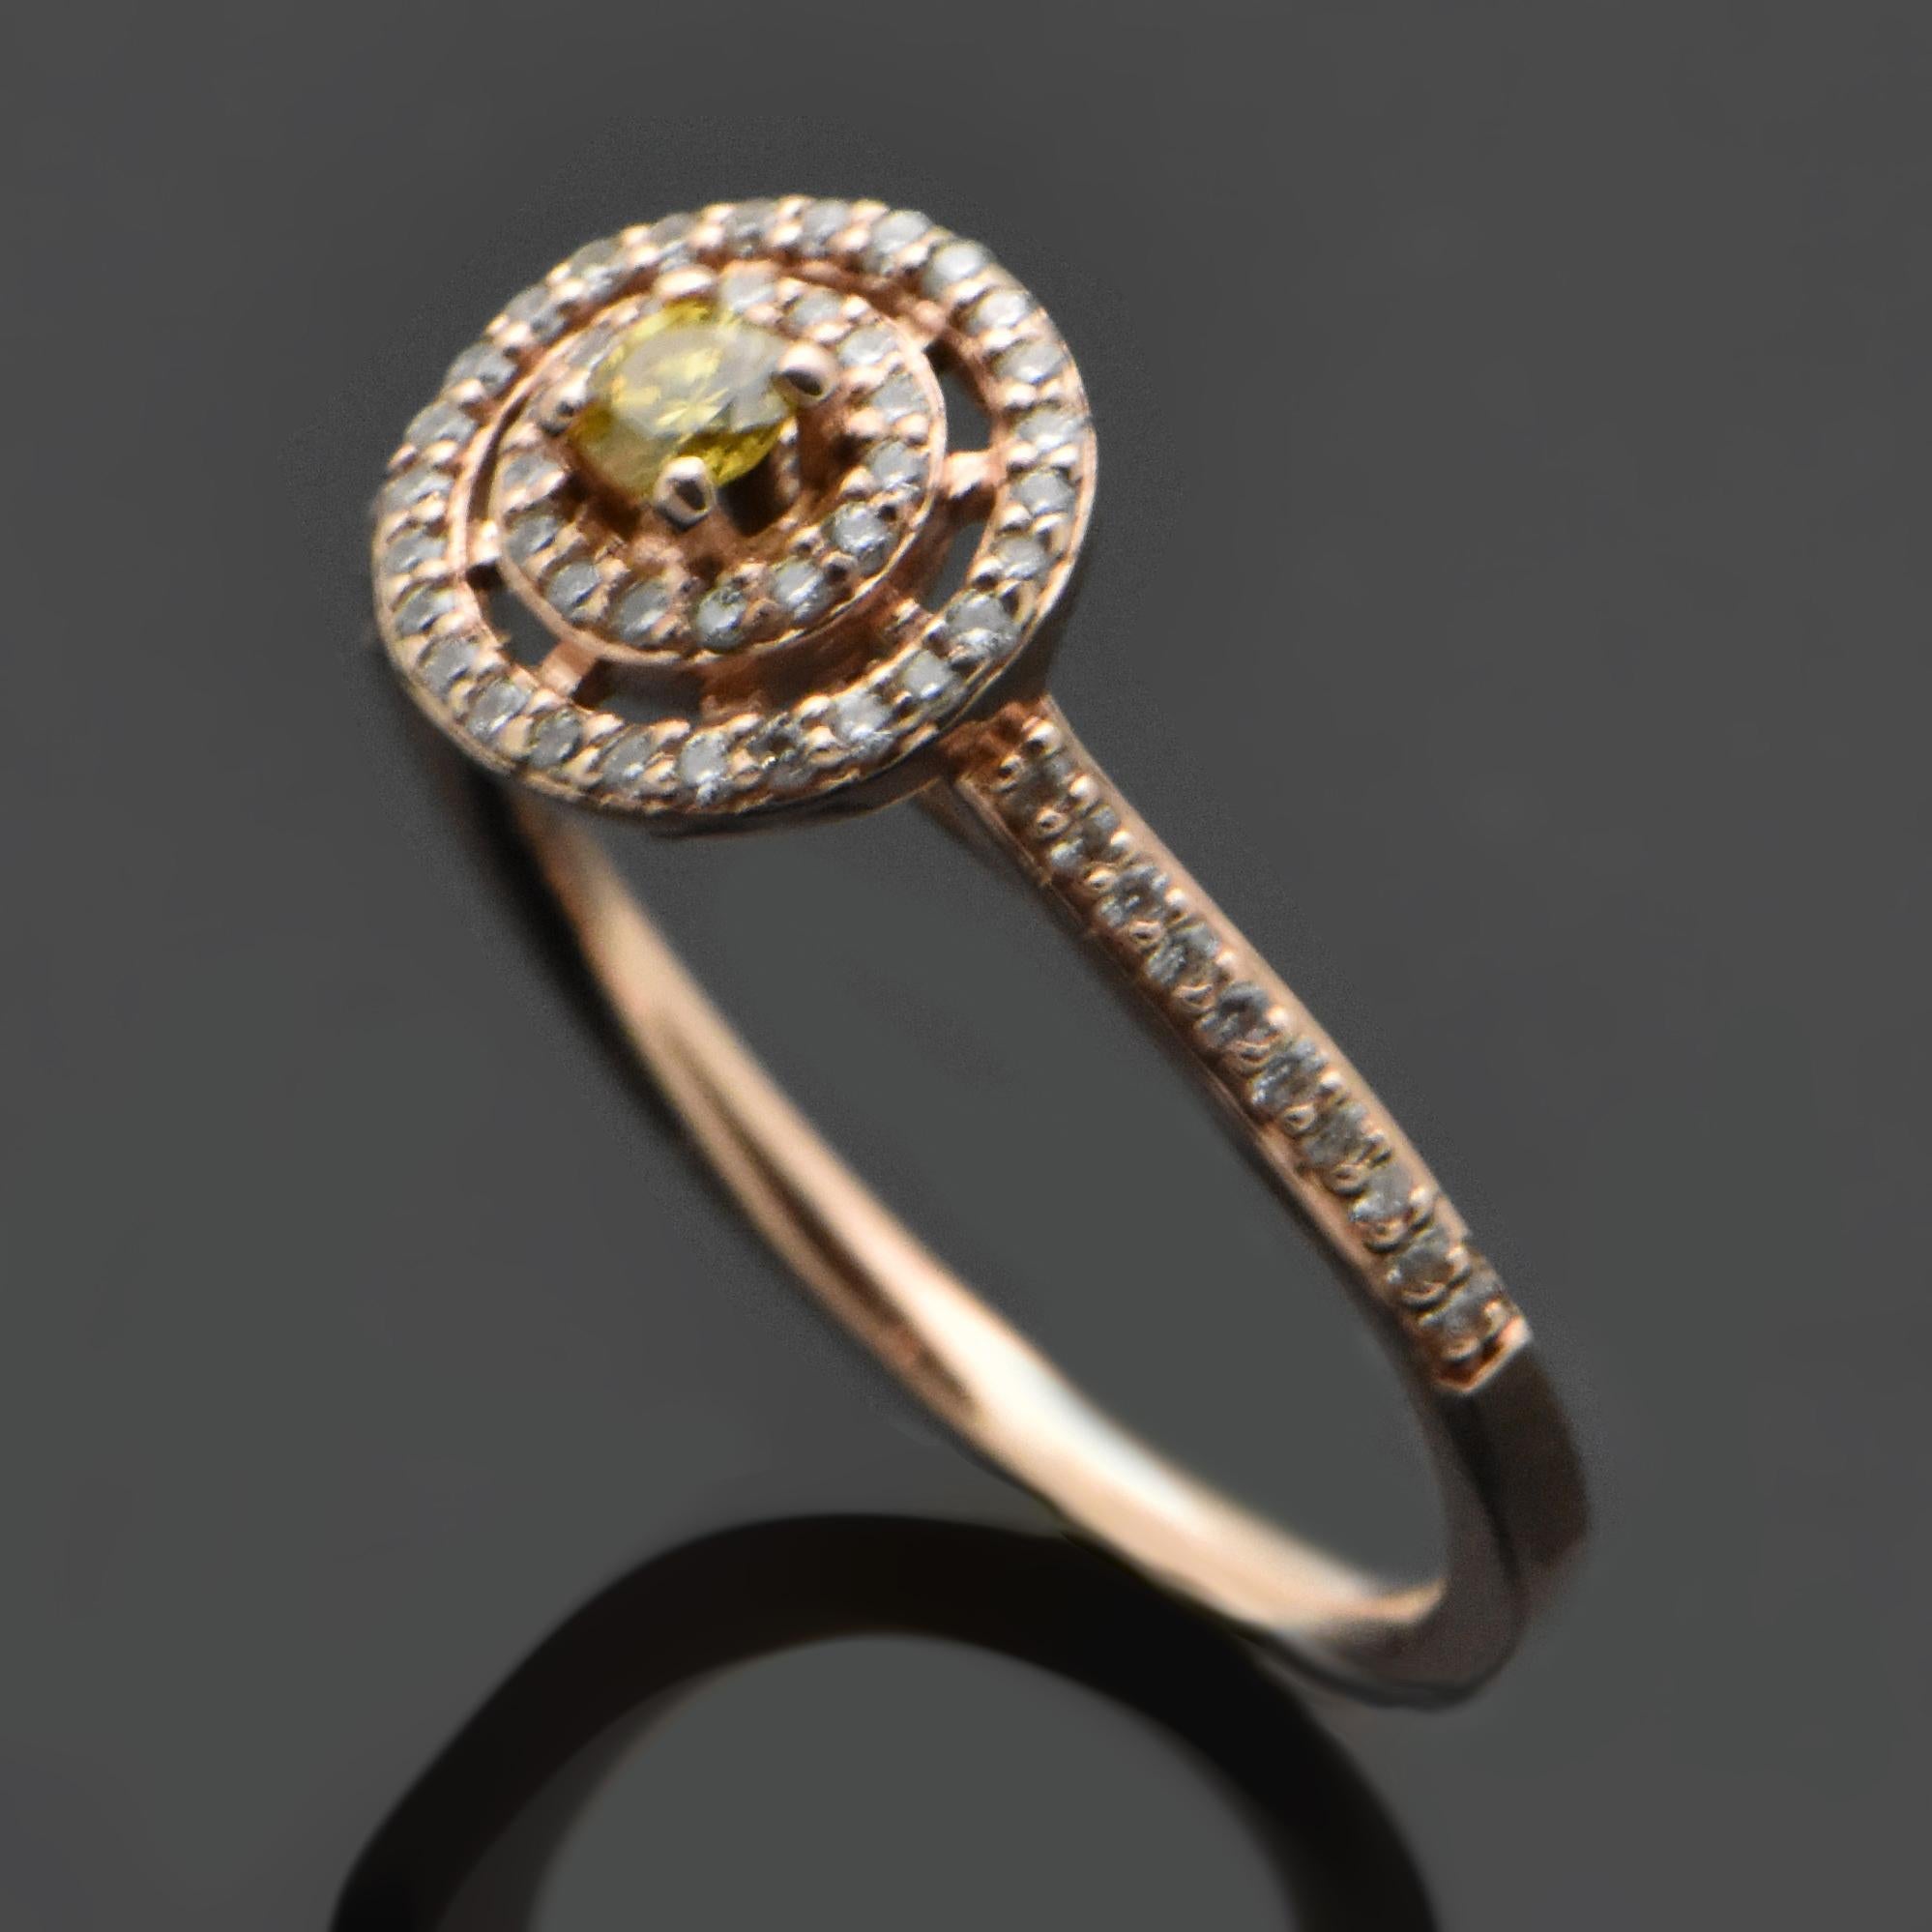 A 14kt rose gold ring with a yellow diamond estimated at 0.08ct. The setting also features a double halo and diamonds down the shank estimated at 0.22cttw. Estimated weight of gold is 2 gr. 

We will size it for you.

